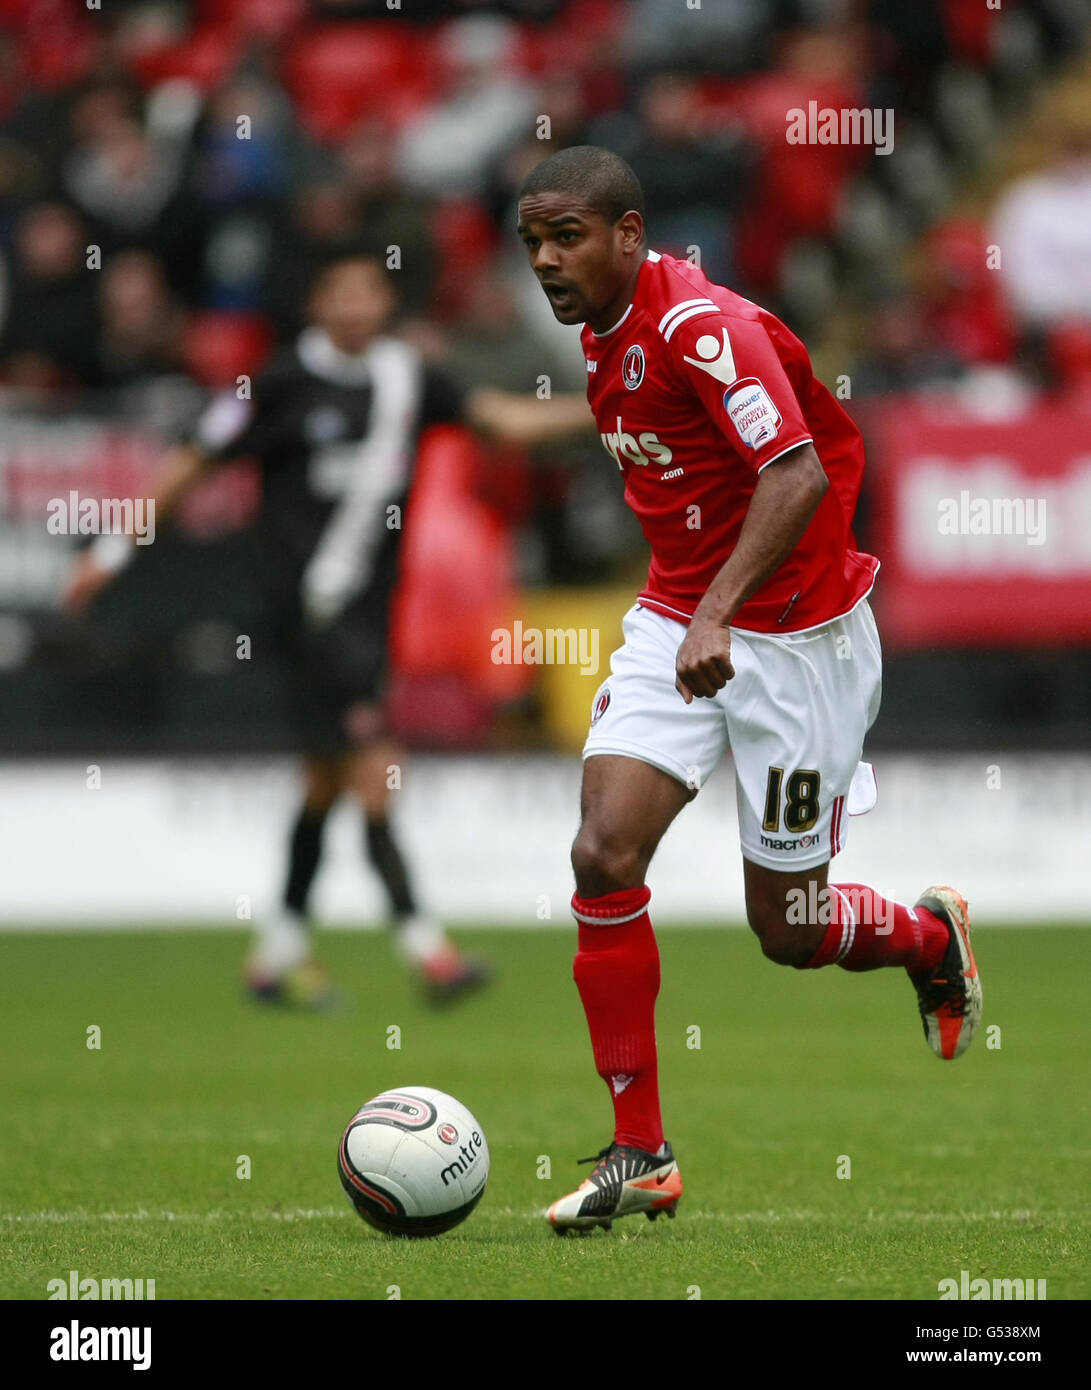 Charlton Athletic's Bradley Pritchard in action during the npower Football League One match at The Valley, London. Stock Photo